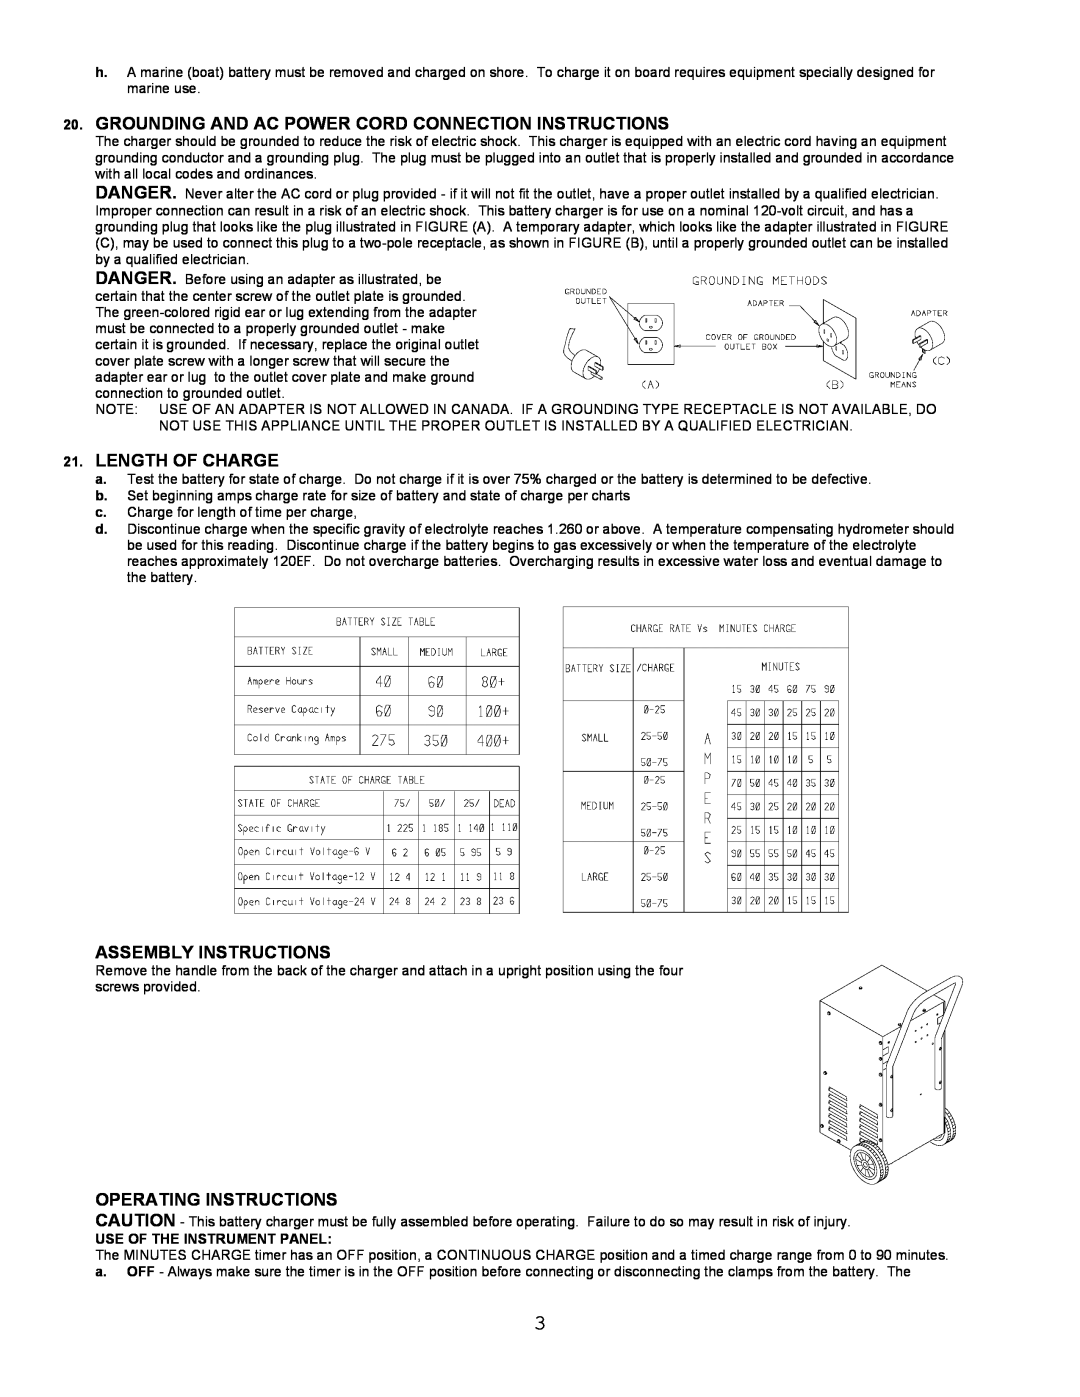 Atec BC-91009 manual Grounding And Ac Power Cord Connection Instructions, Length Of Charge, Assembly Instructions 